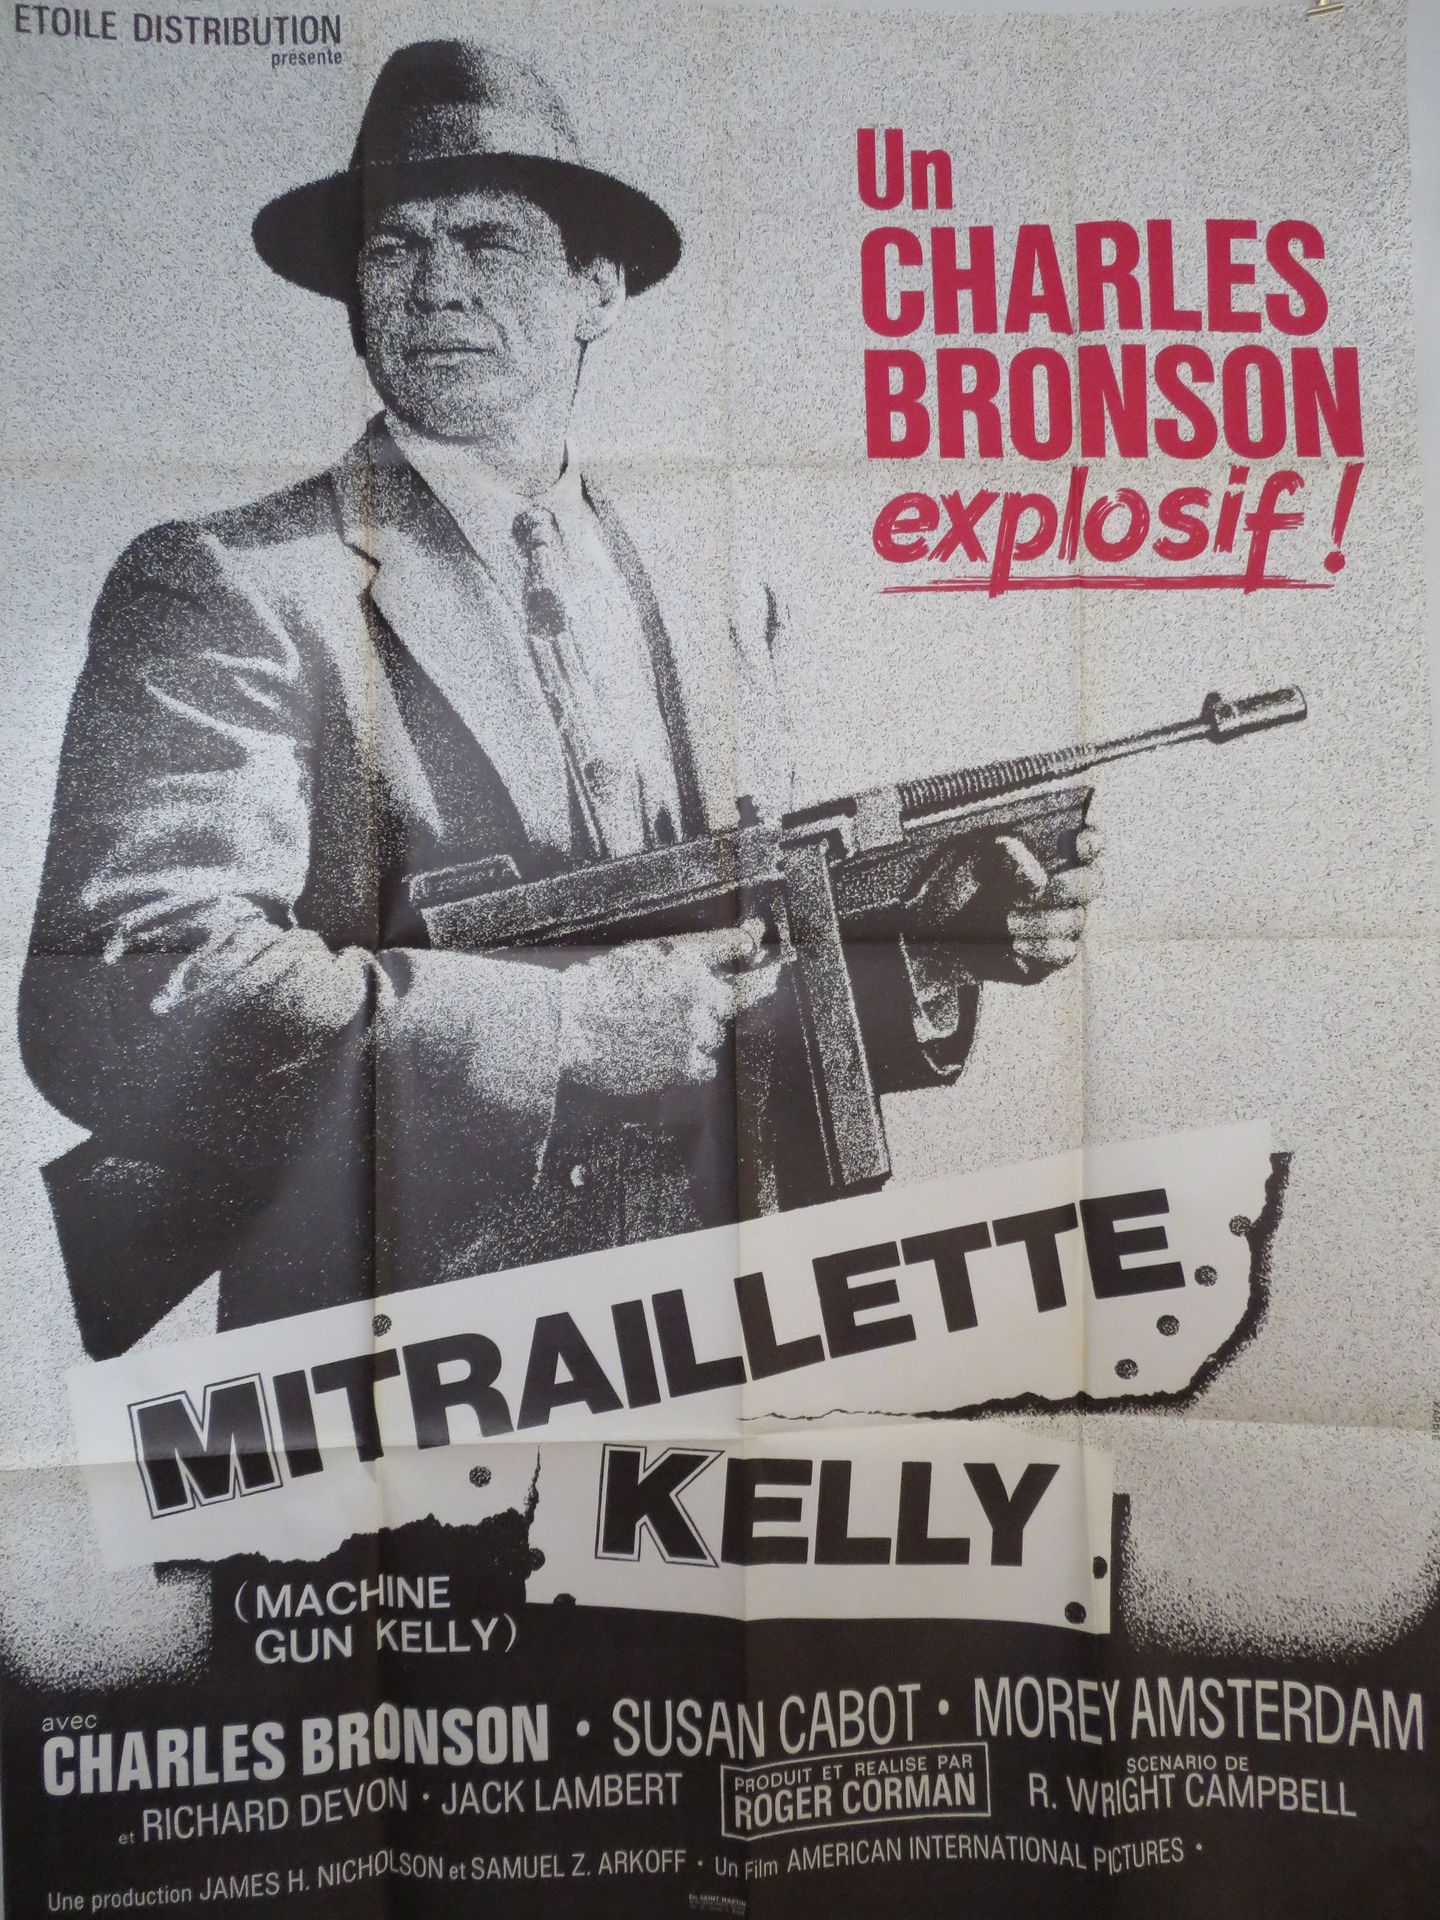 Null "MITRAILLETTE KELLY" (1958) by Roger CORMAN with Charles Bronson - Illustra&hellip;